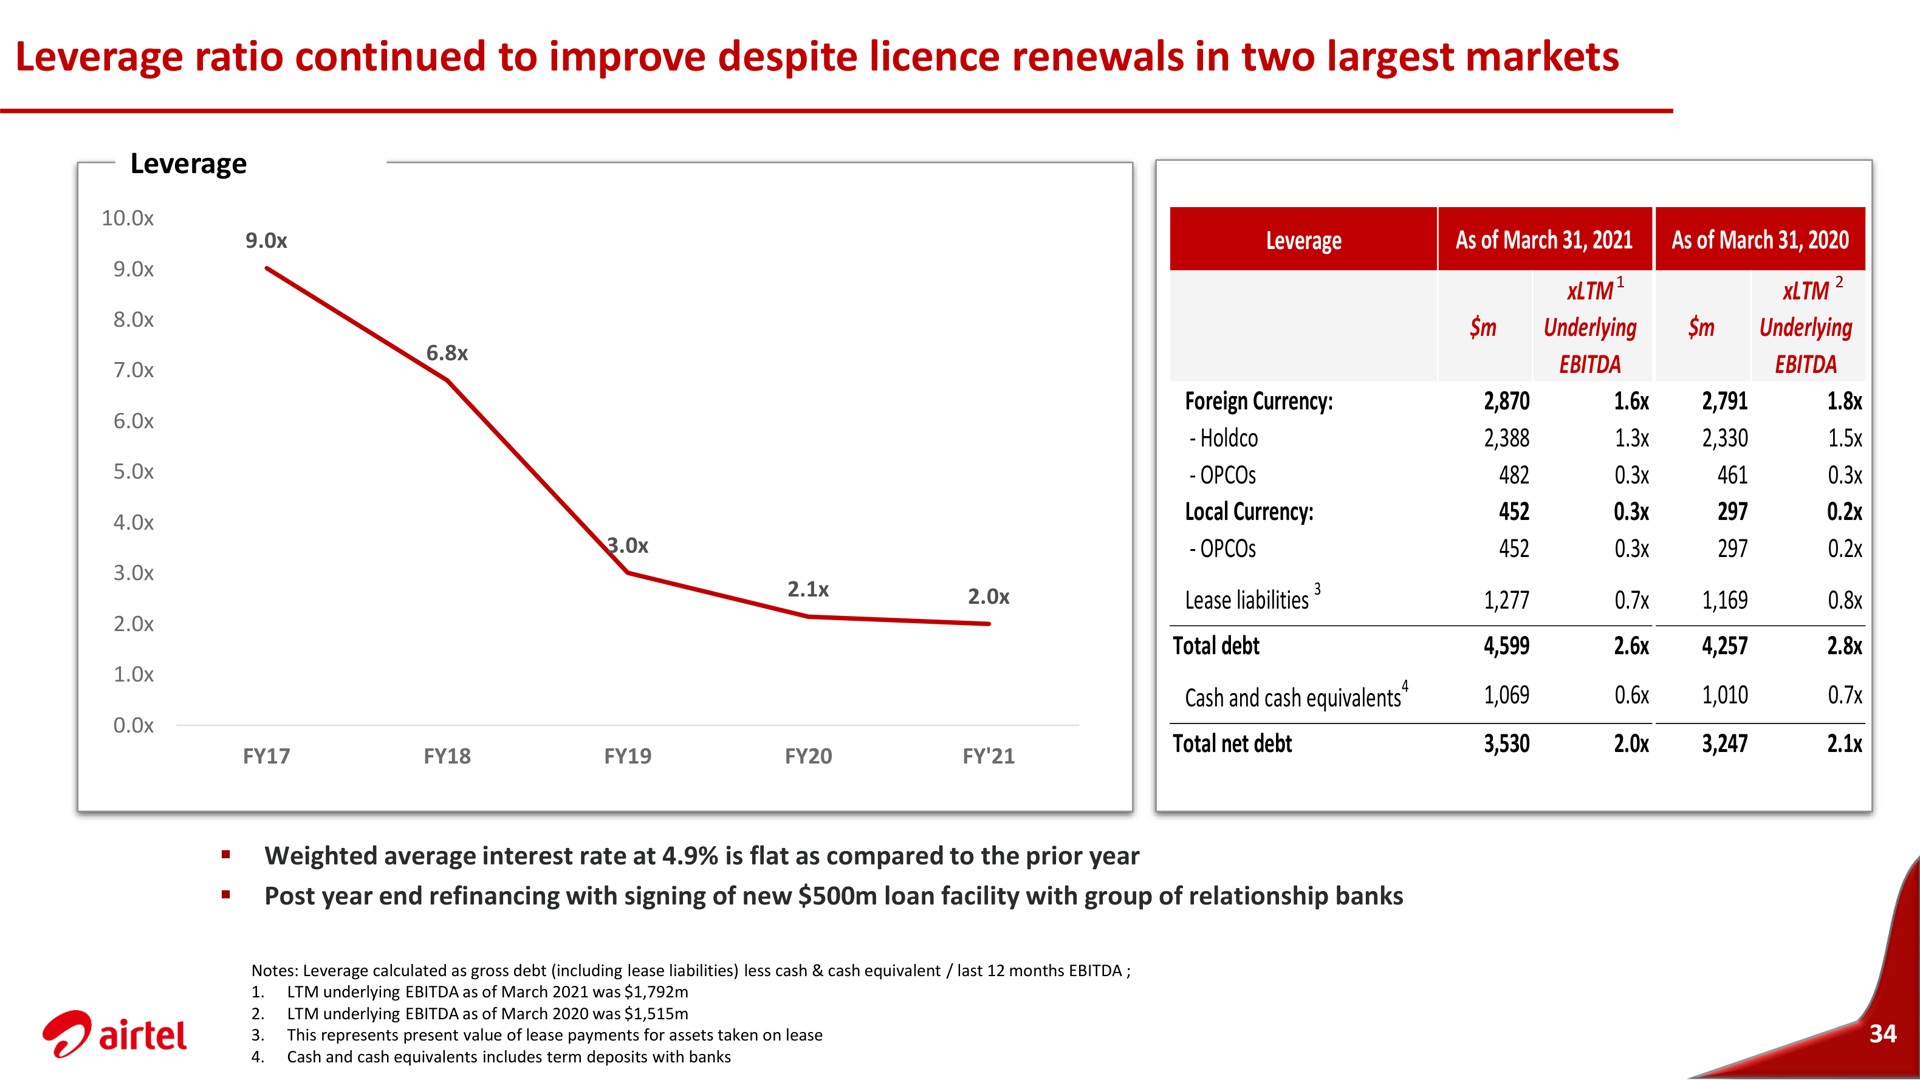 leverage ratio continued to improve despite renewals in two markets | Airtel Africa